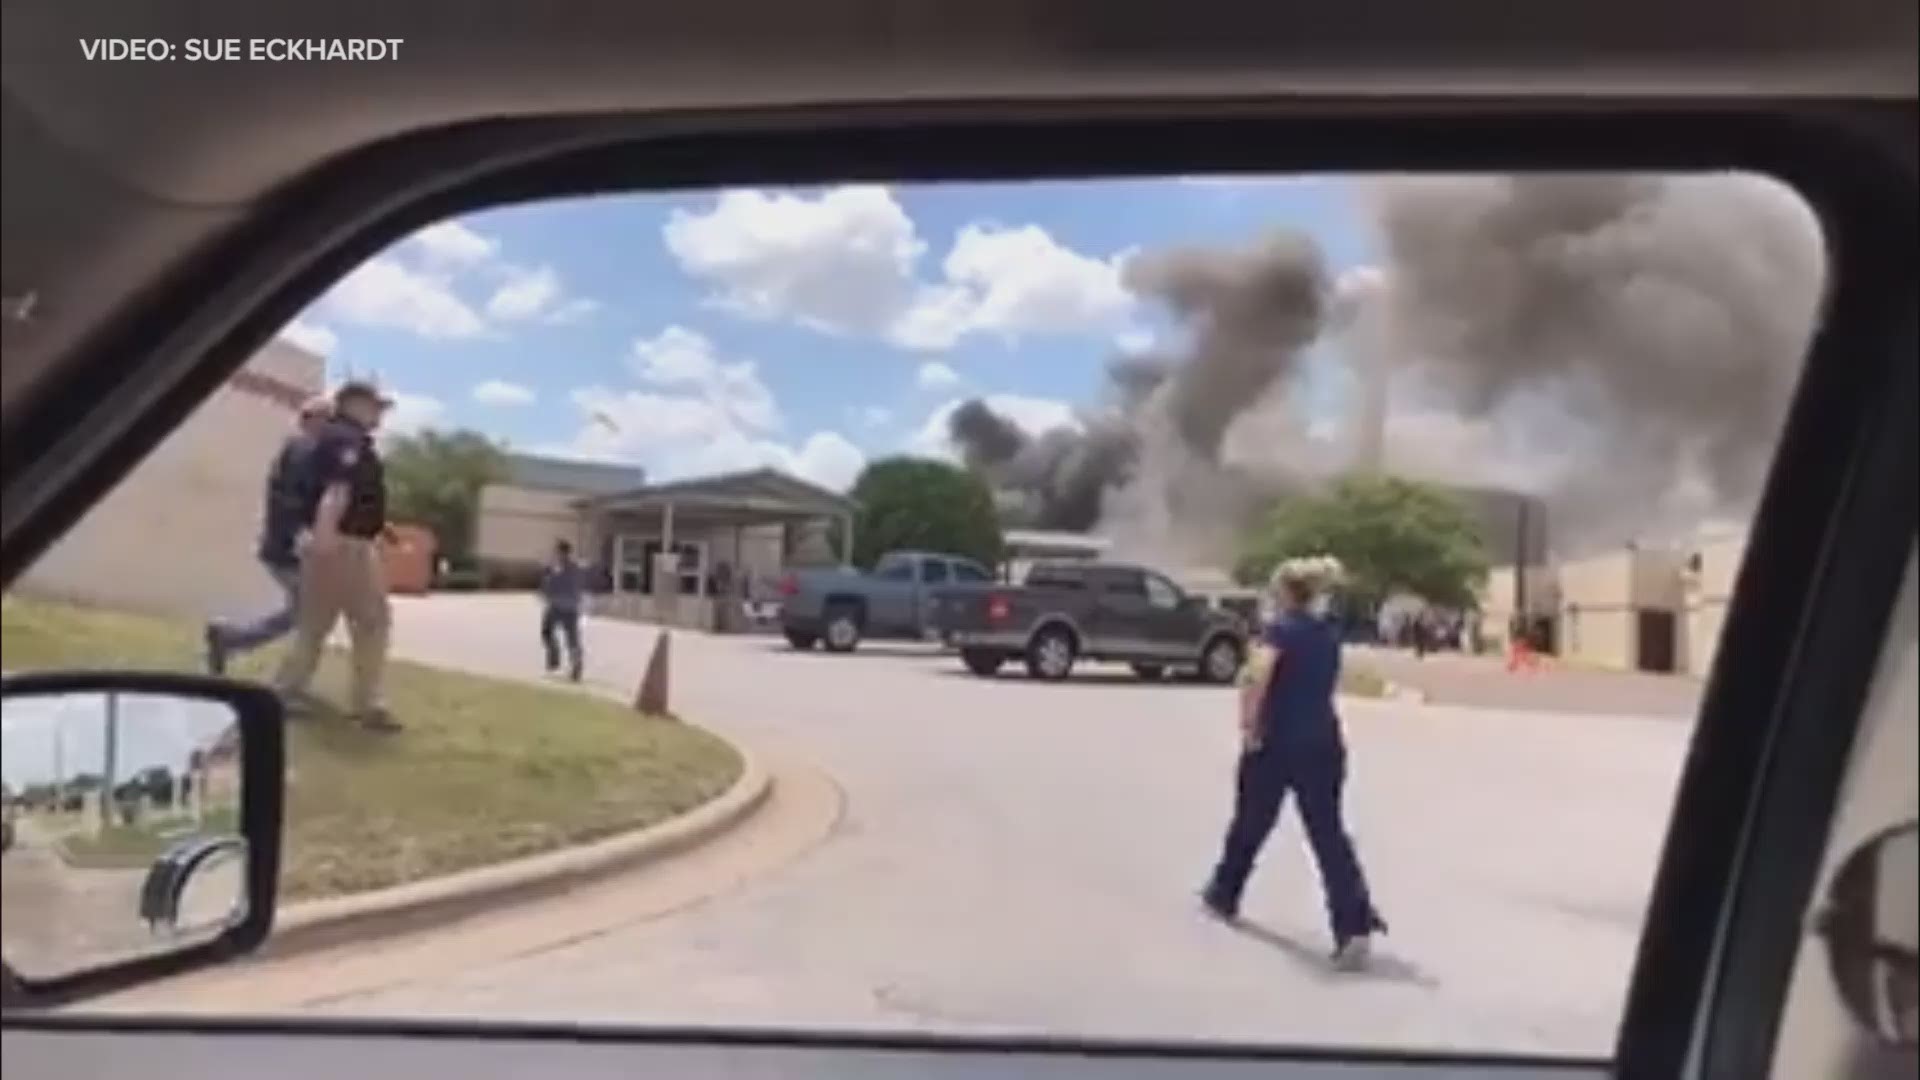 Sue Eckhardt shared this video of a hospital explosion in central Texas.